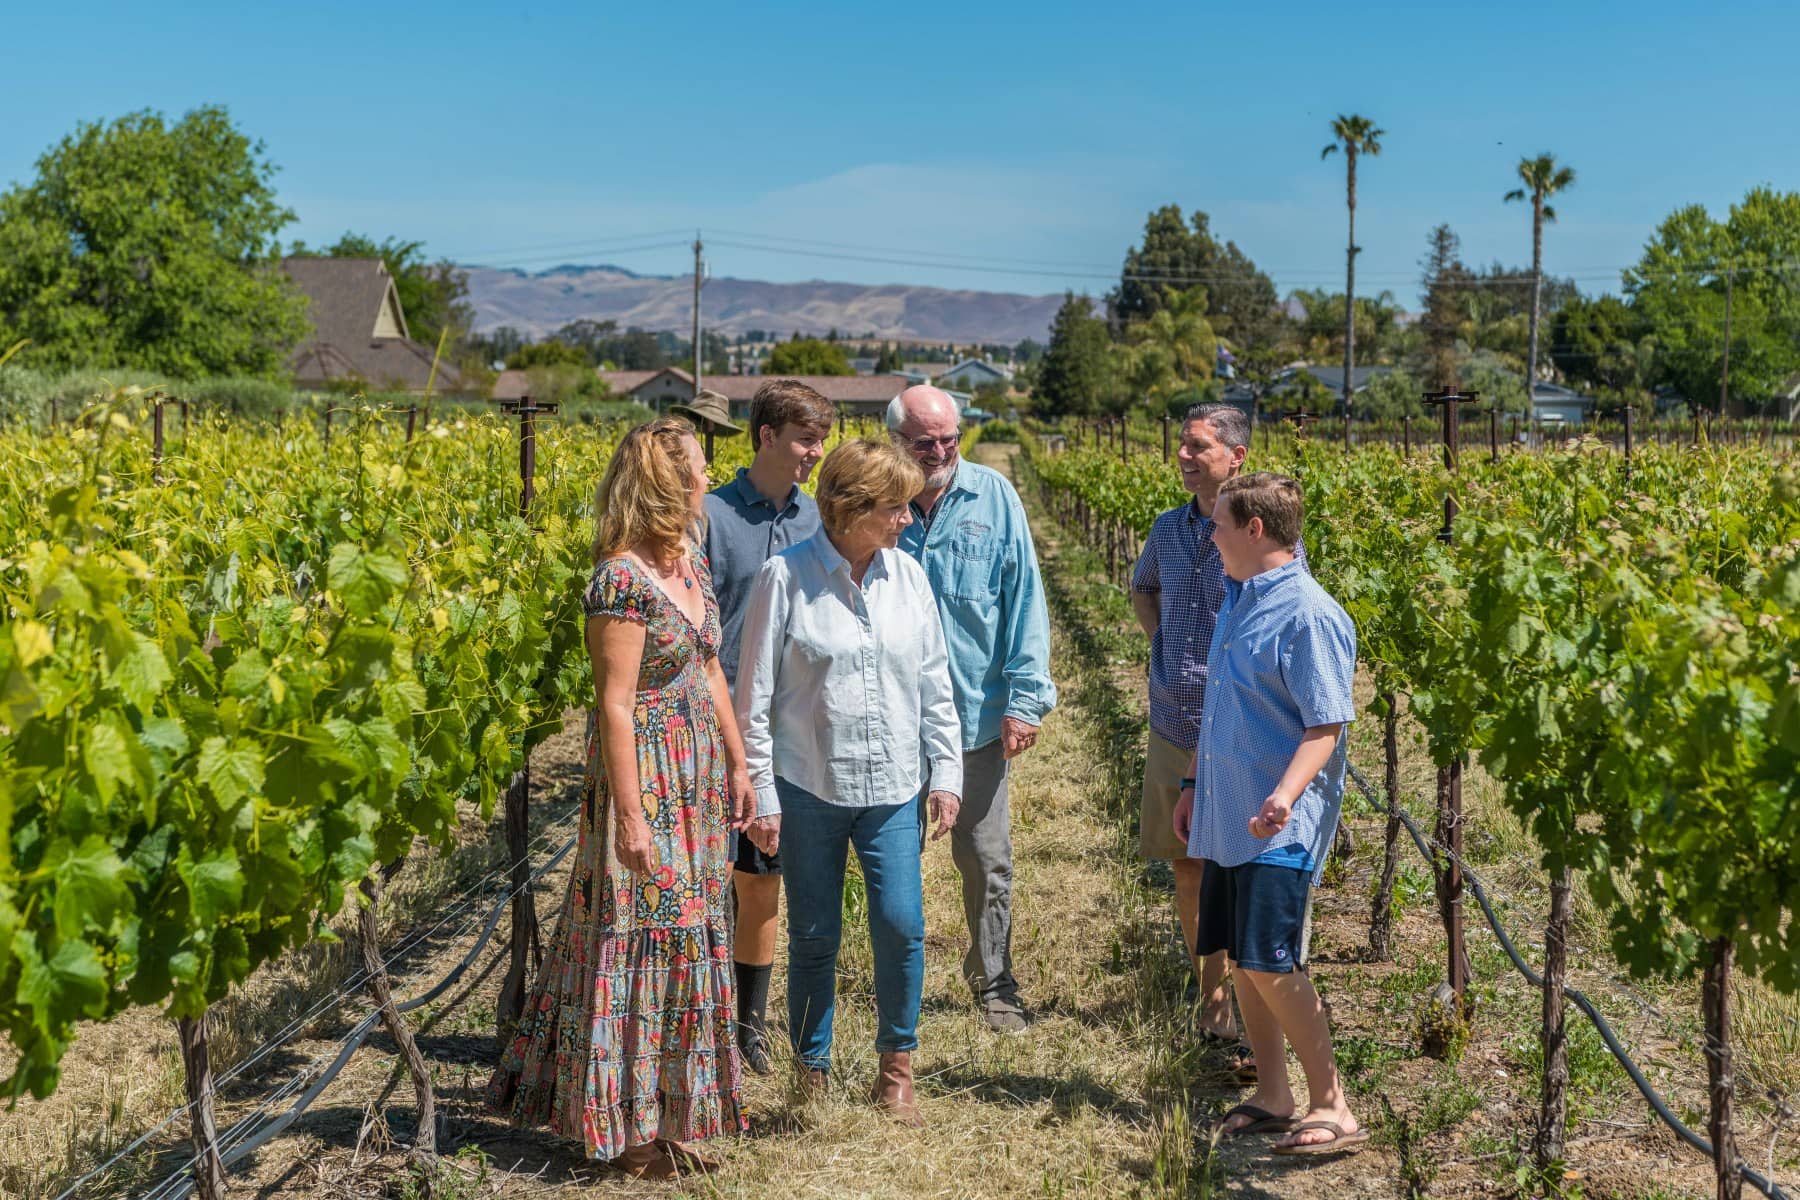 Winery owners Garry and Nancy Rodrigue with their extended family are walking through the vineyards on the RM estate